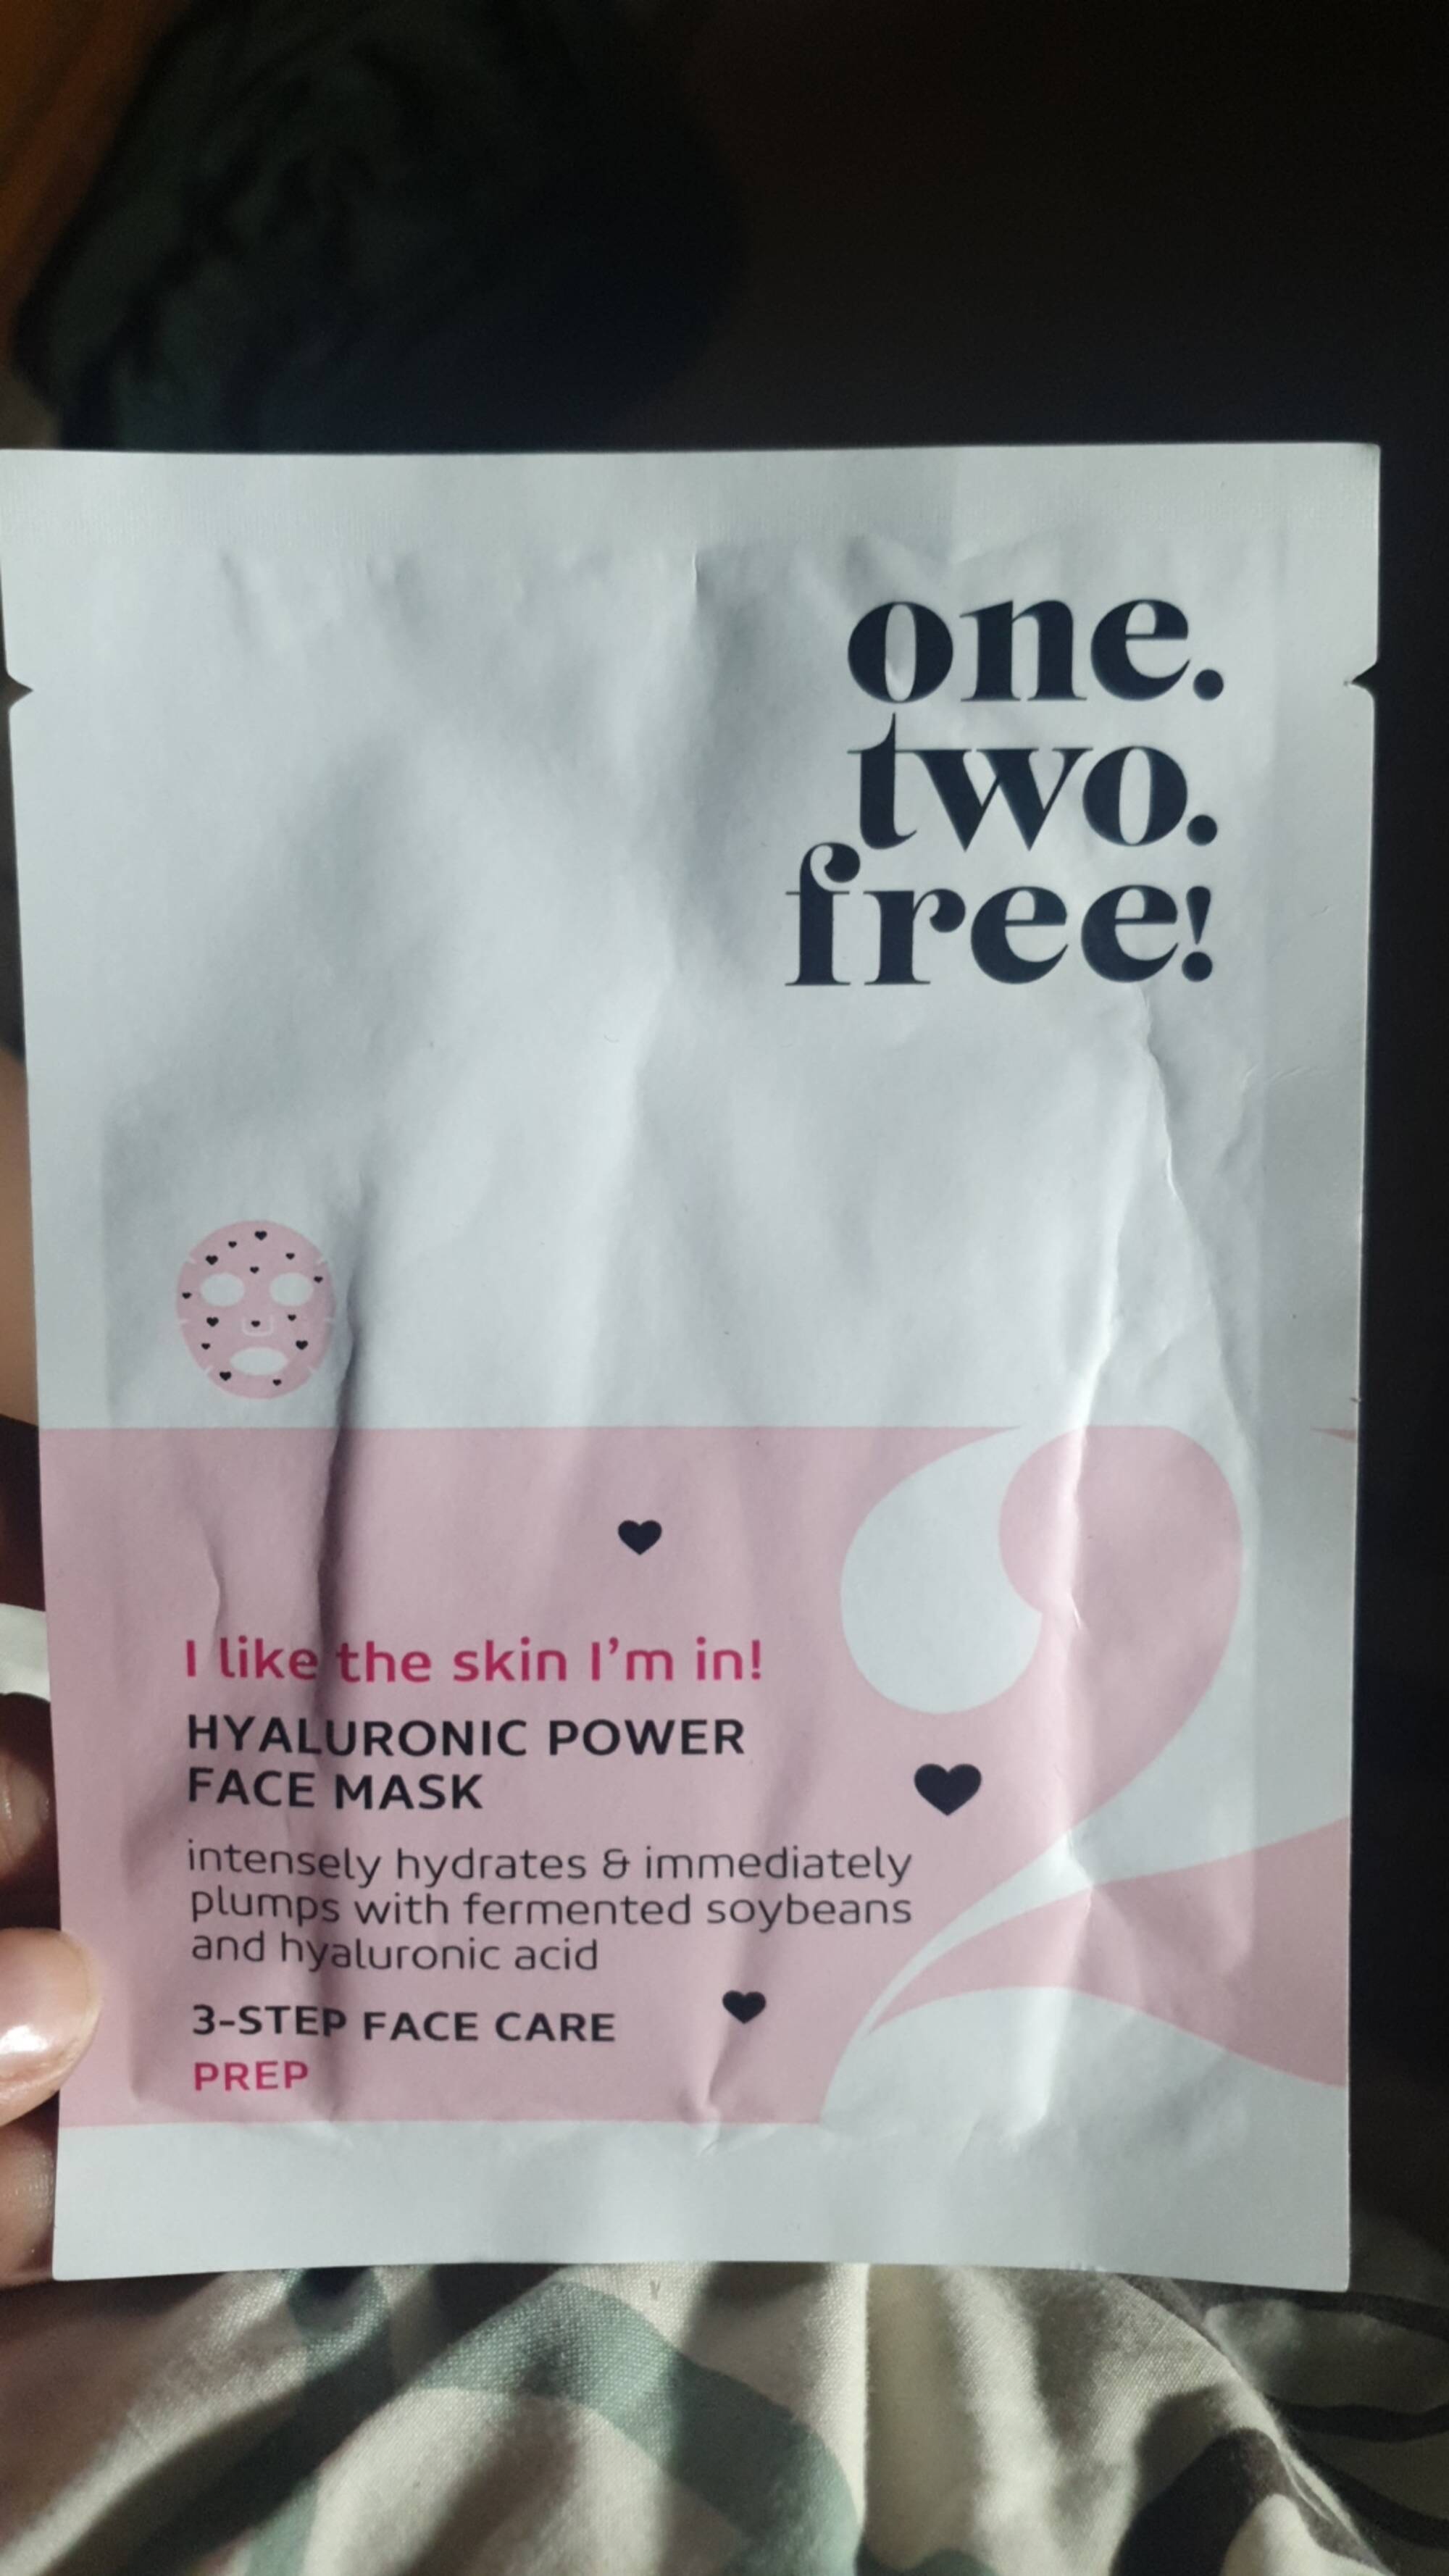 ONE.TWO.FREE! - Hyaluronic power - Face mask